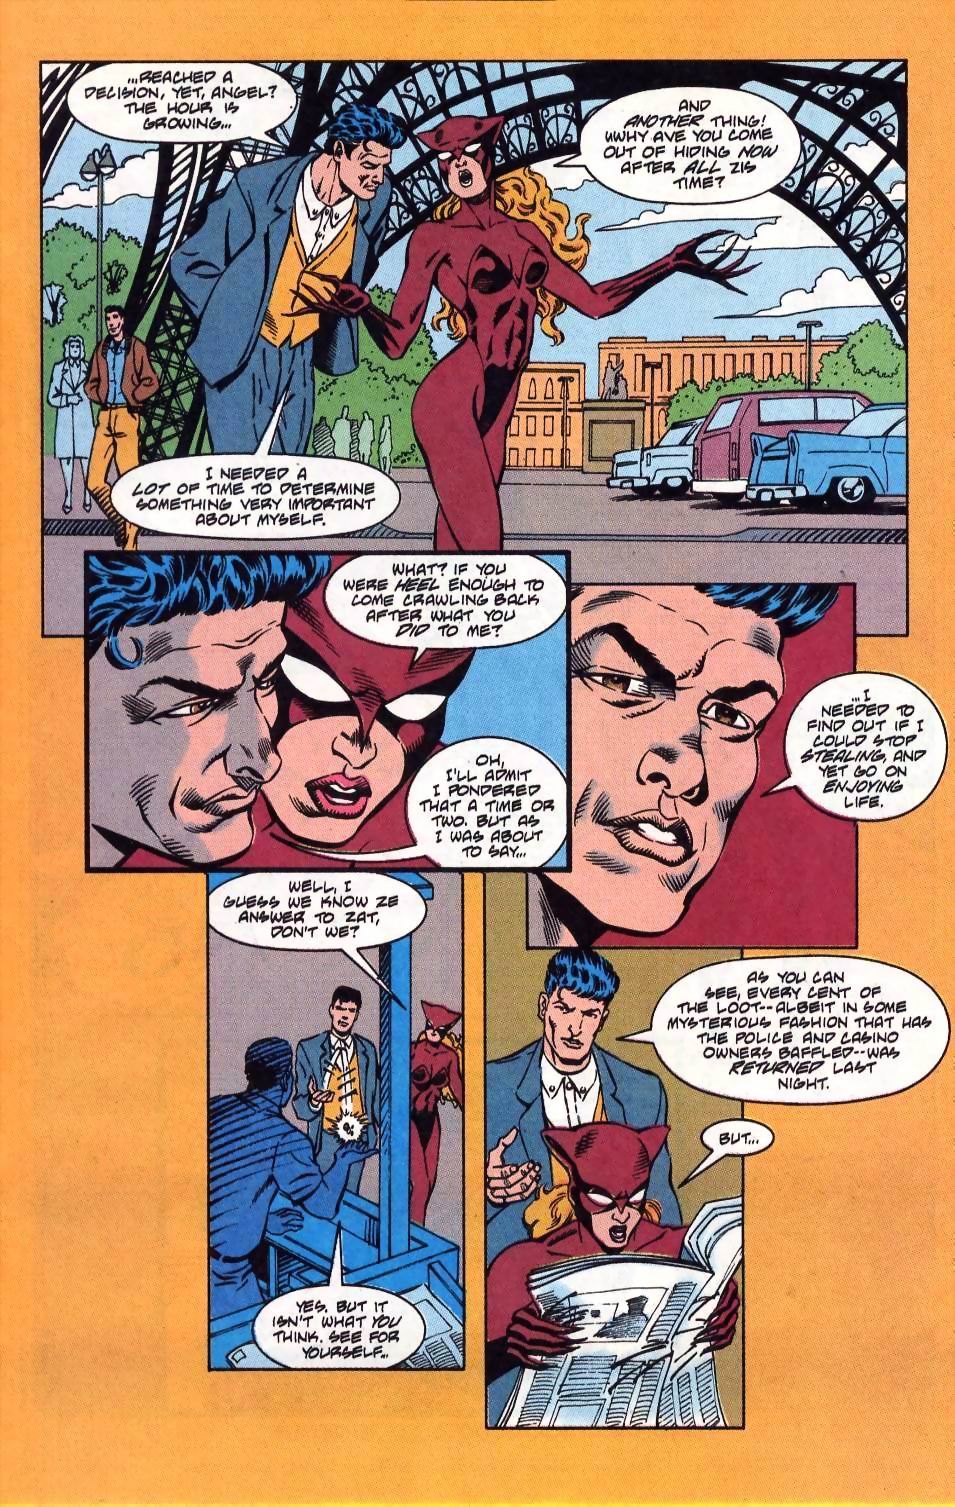 Justice League International (1993) 53 Page 7